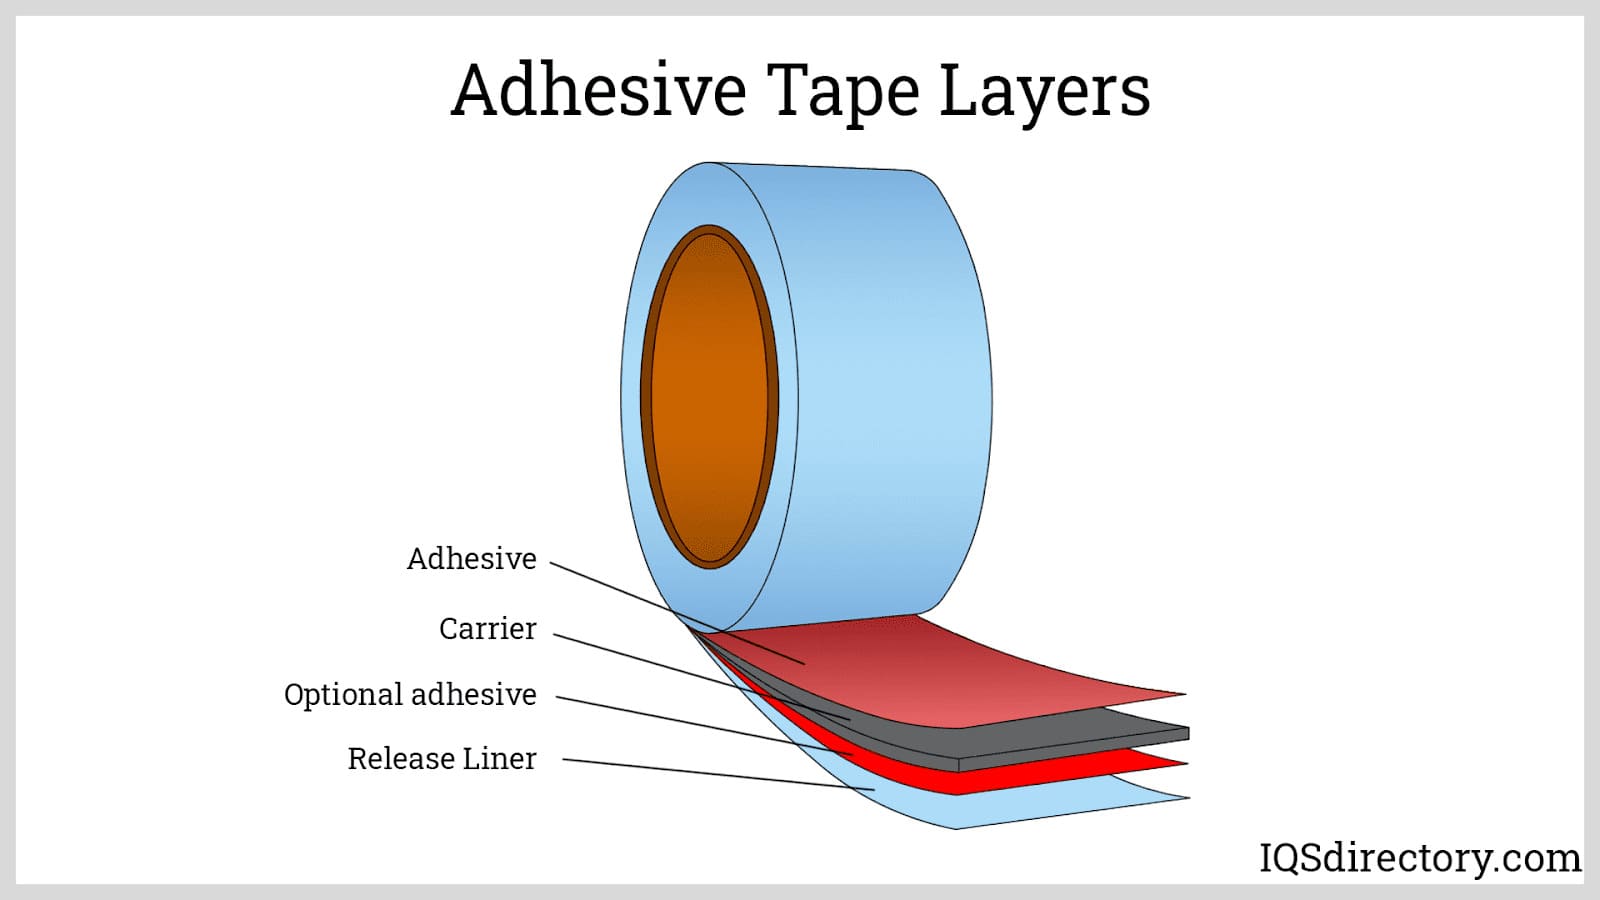 Properties of Natural Rubber Adhesives